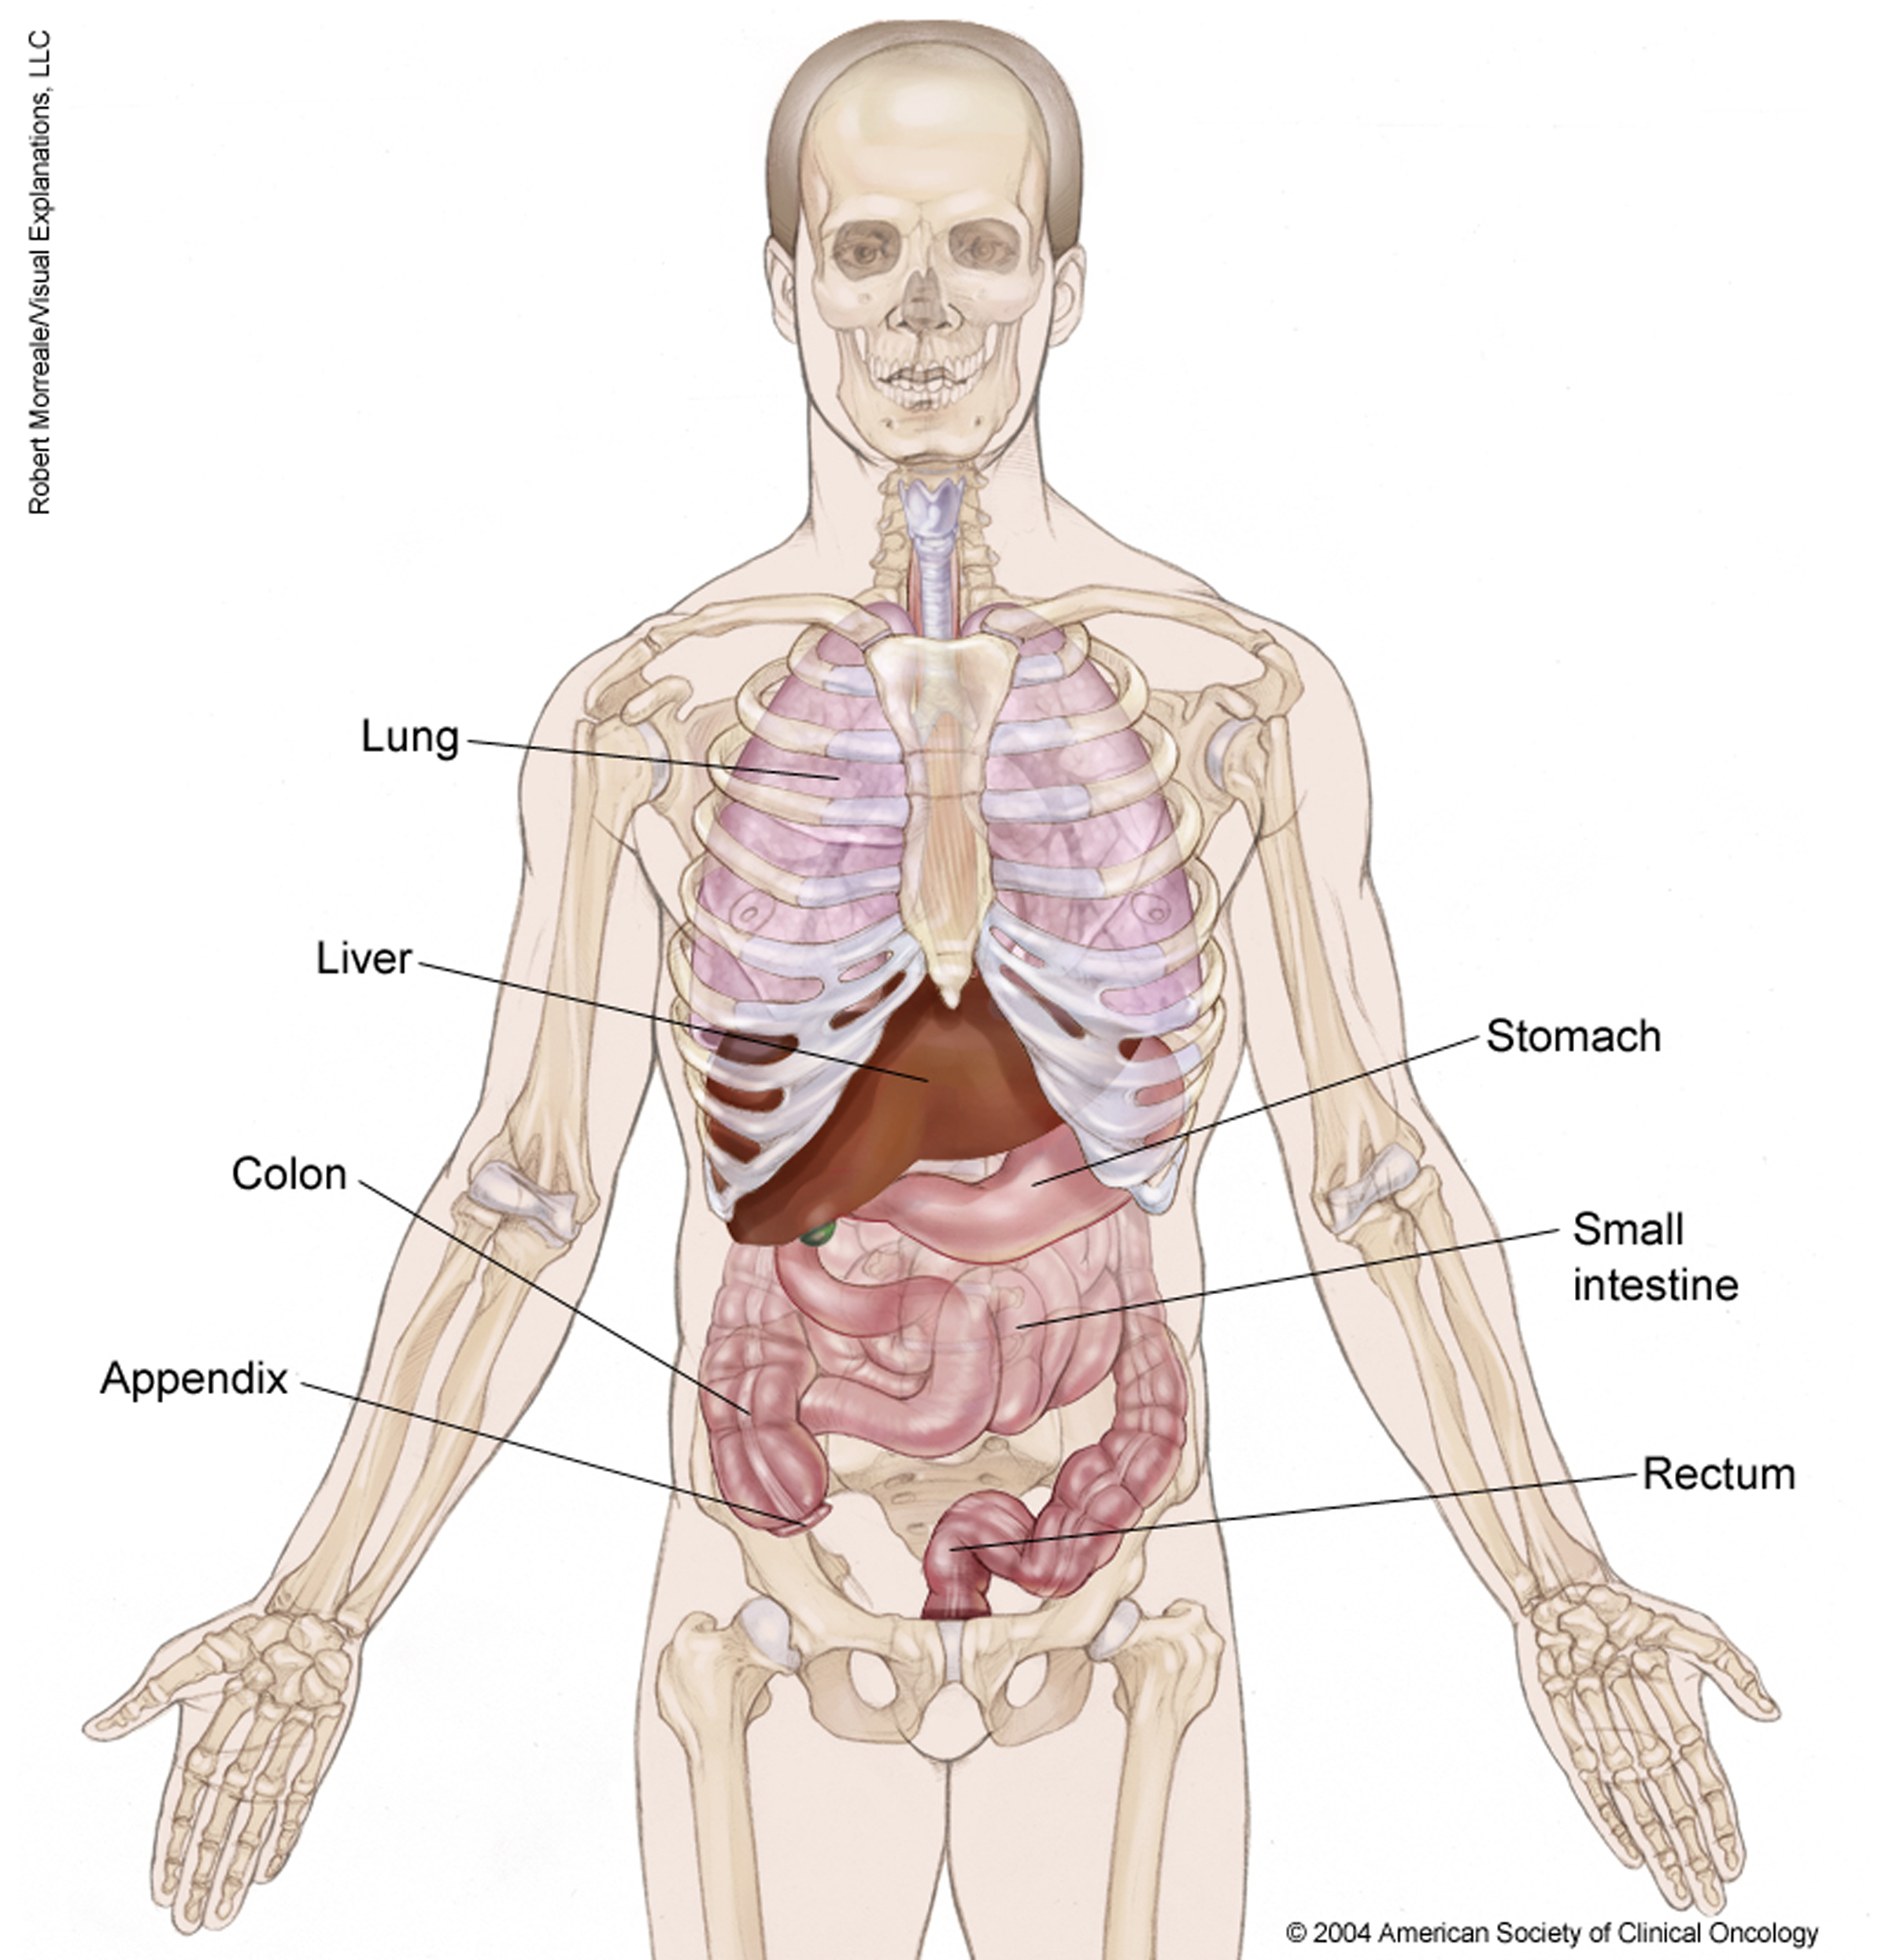 Anatomy of possible sites where carcinoid tumors can occur. See description for more information. 